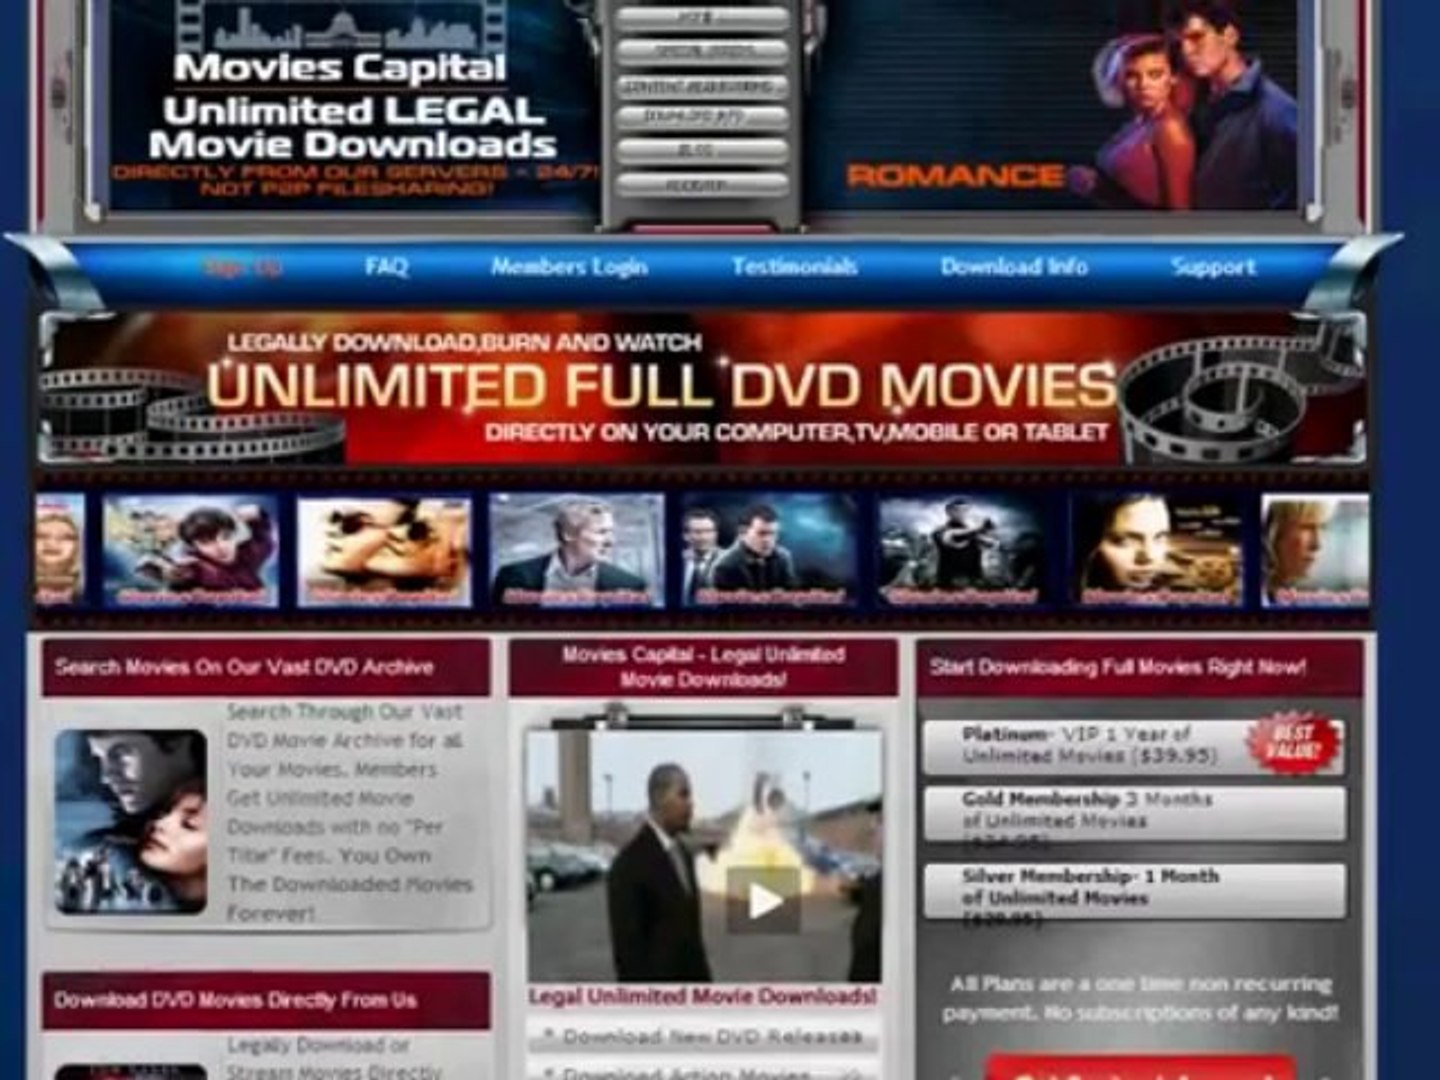 movies capital - movies free online